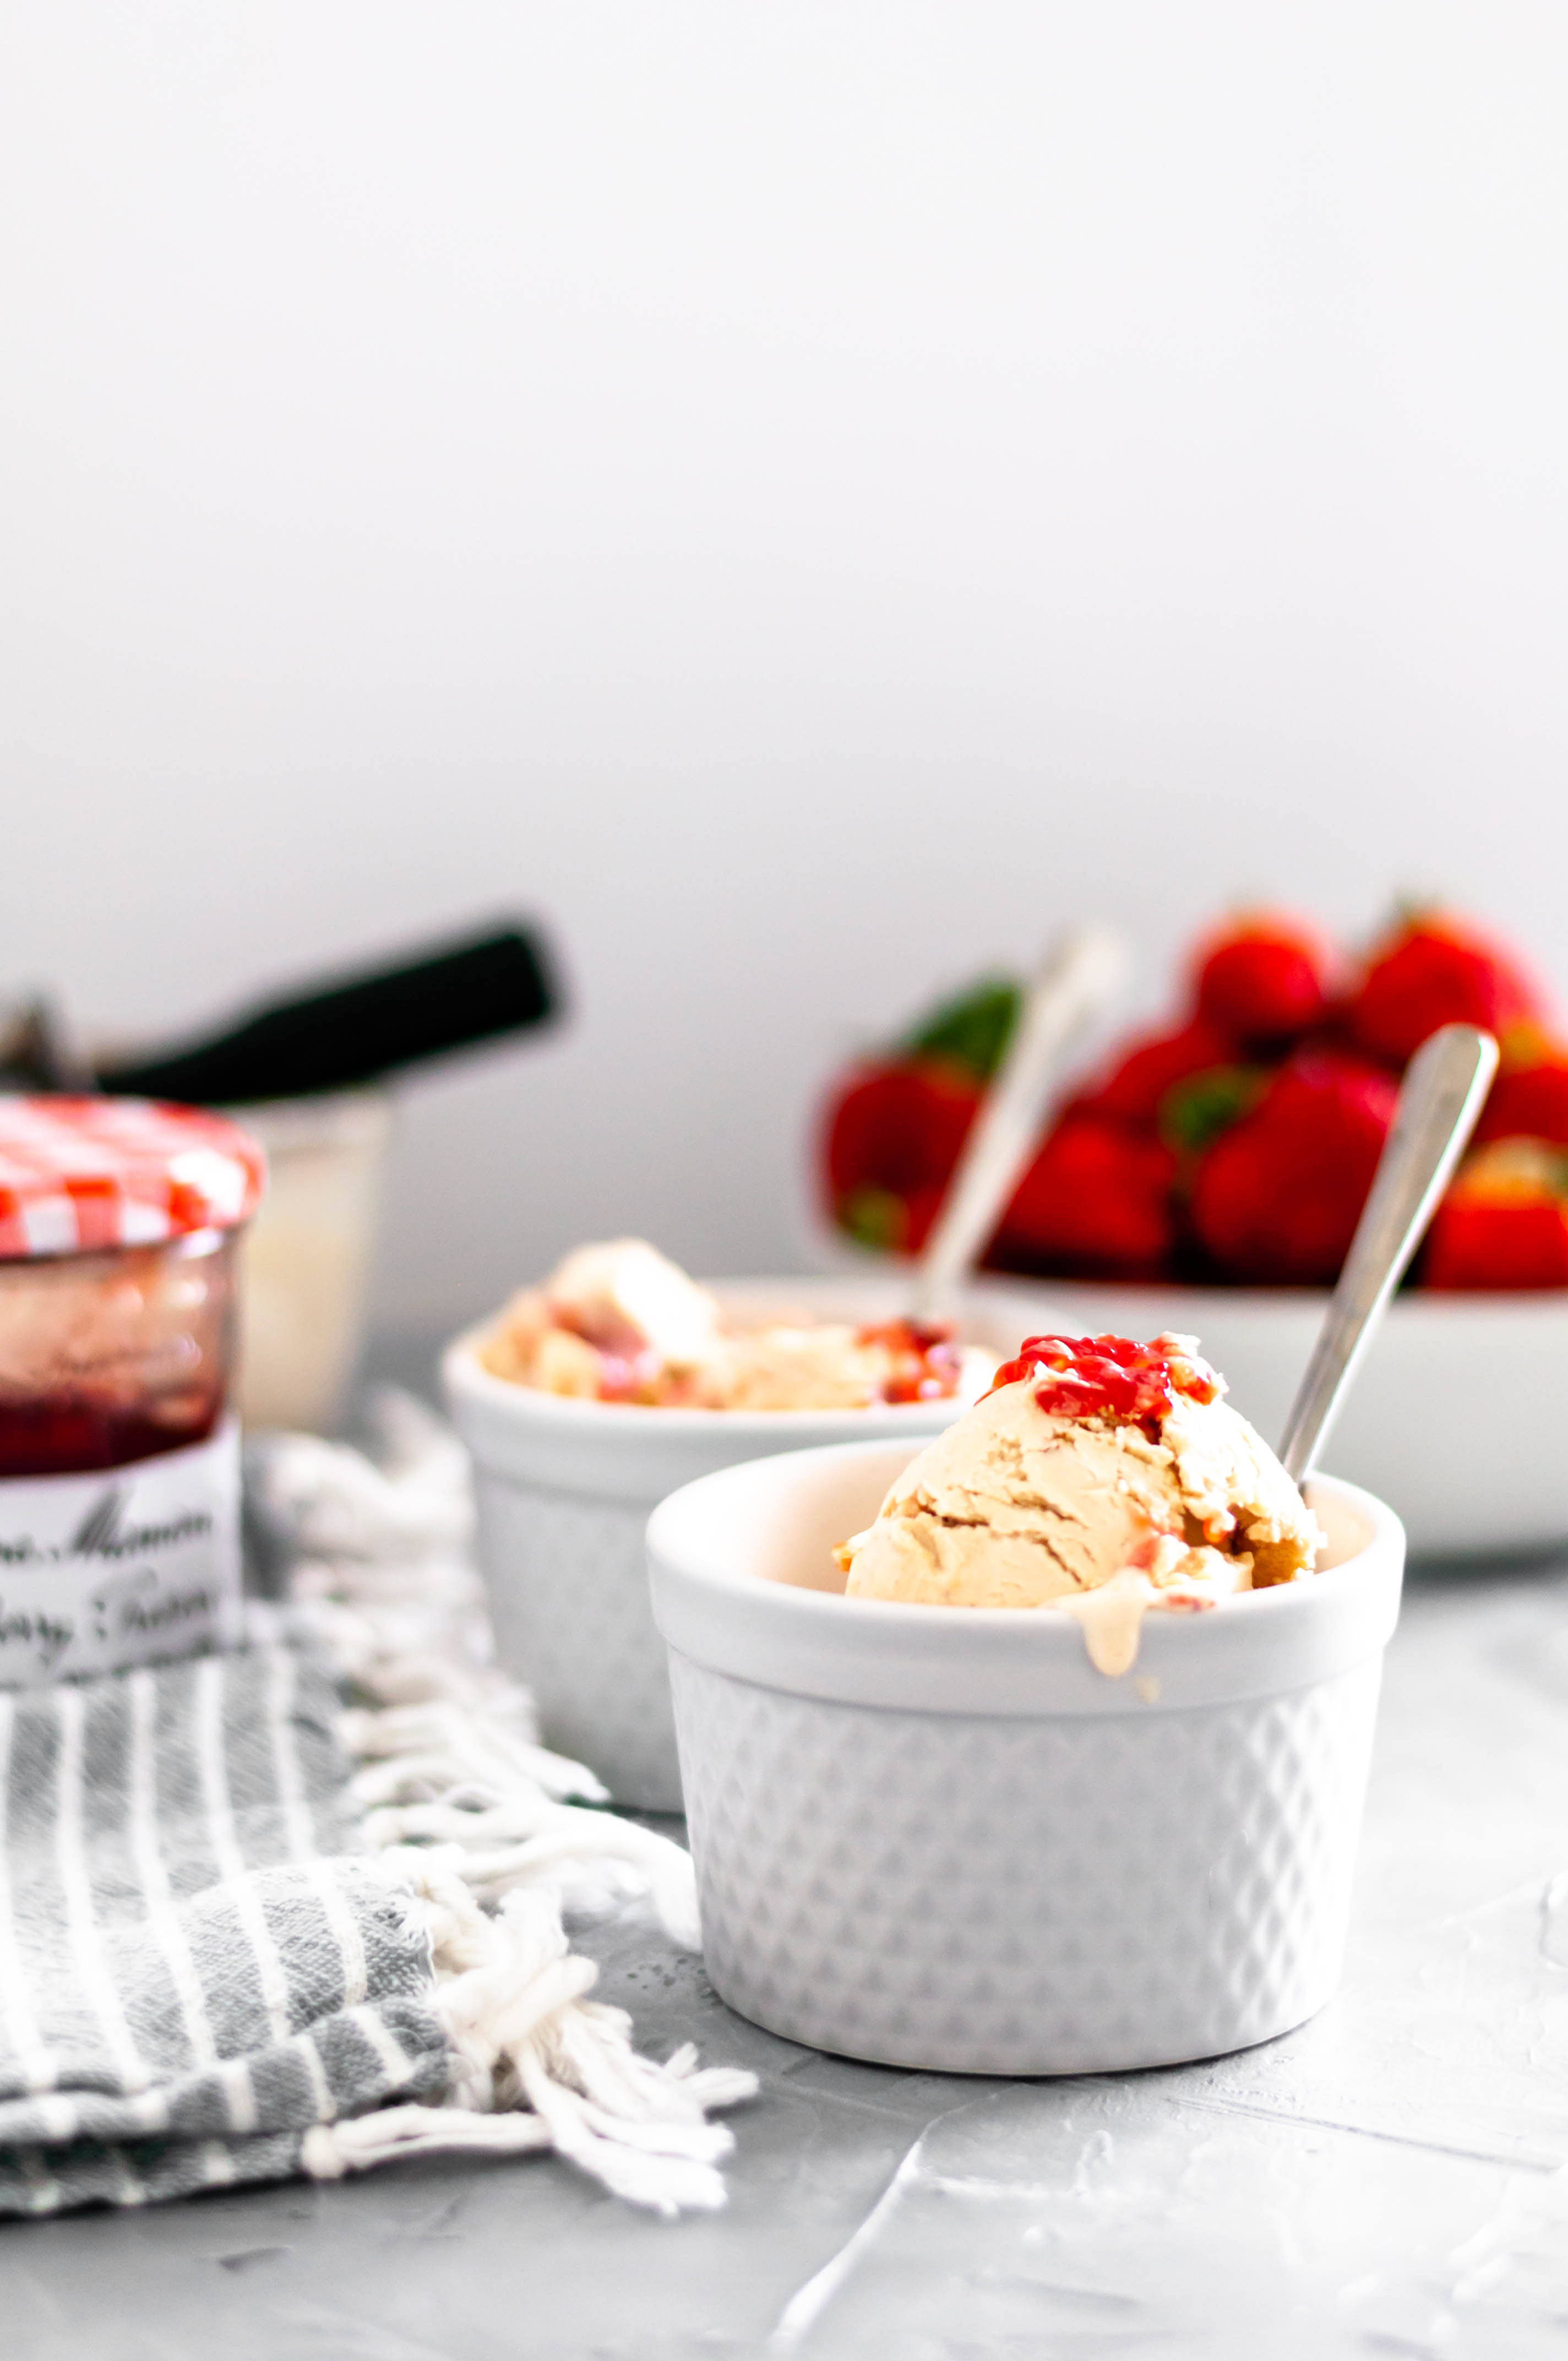 Combine two childhood classics with this Peanut Butter and Jelly Ice Cream. Smooth, creamy peanut butter ice cream, crumbled vanilla cookies and a jelly swirl.